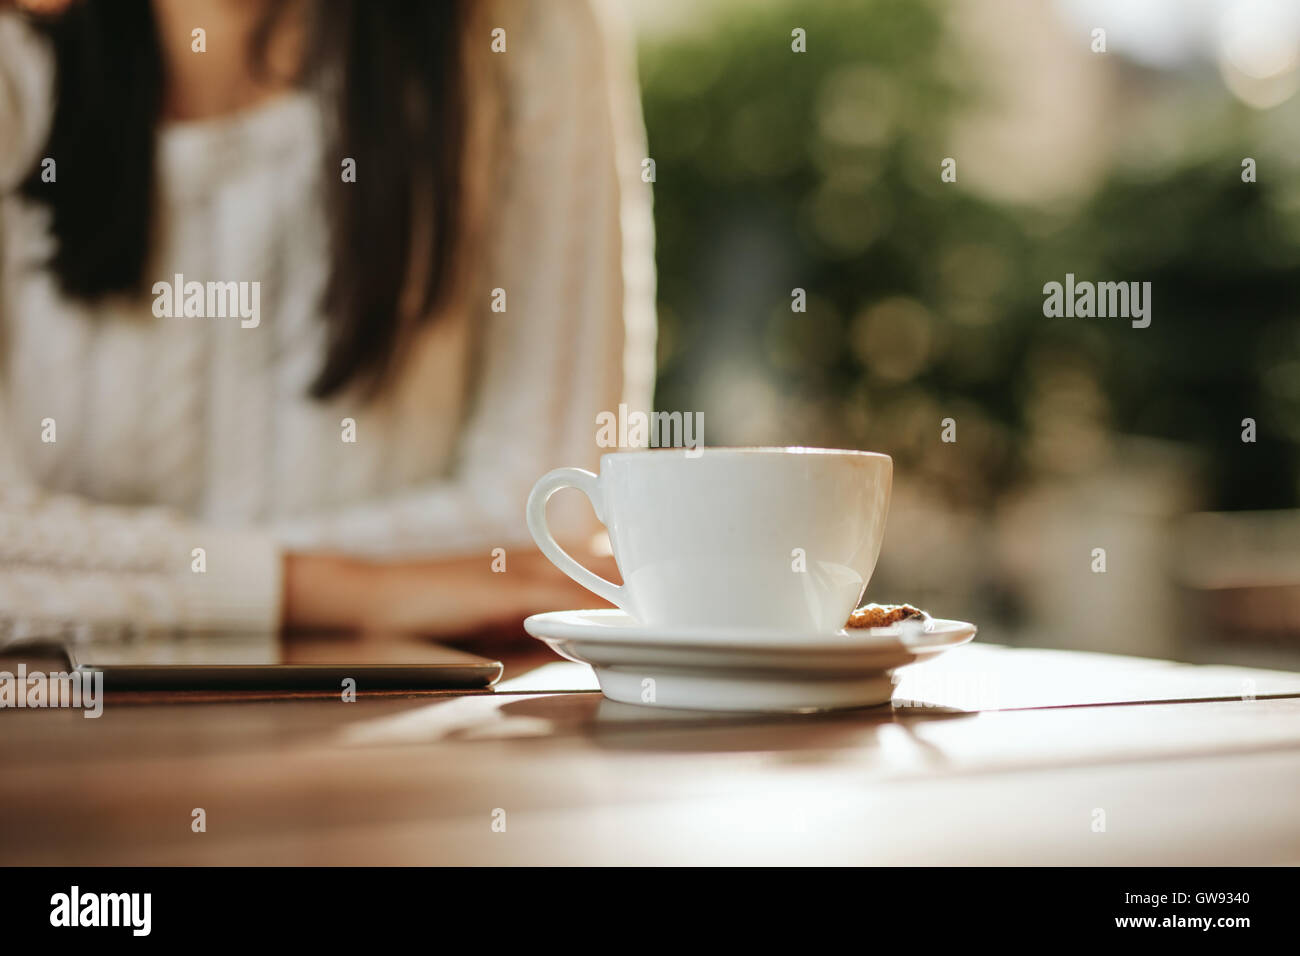 Close up shot of cup of coffee and digital tablet on cafe table with woman. Stock Photo